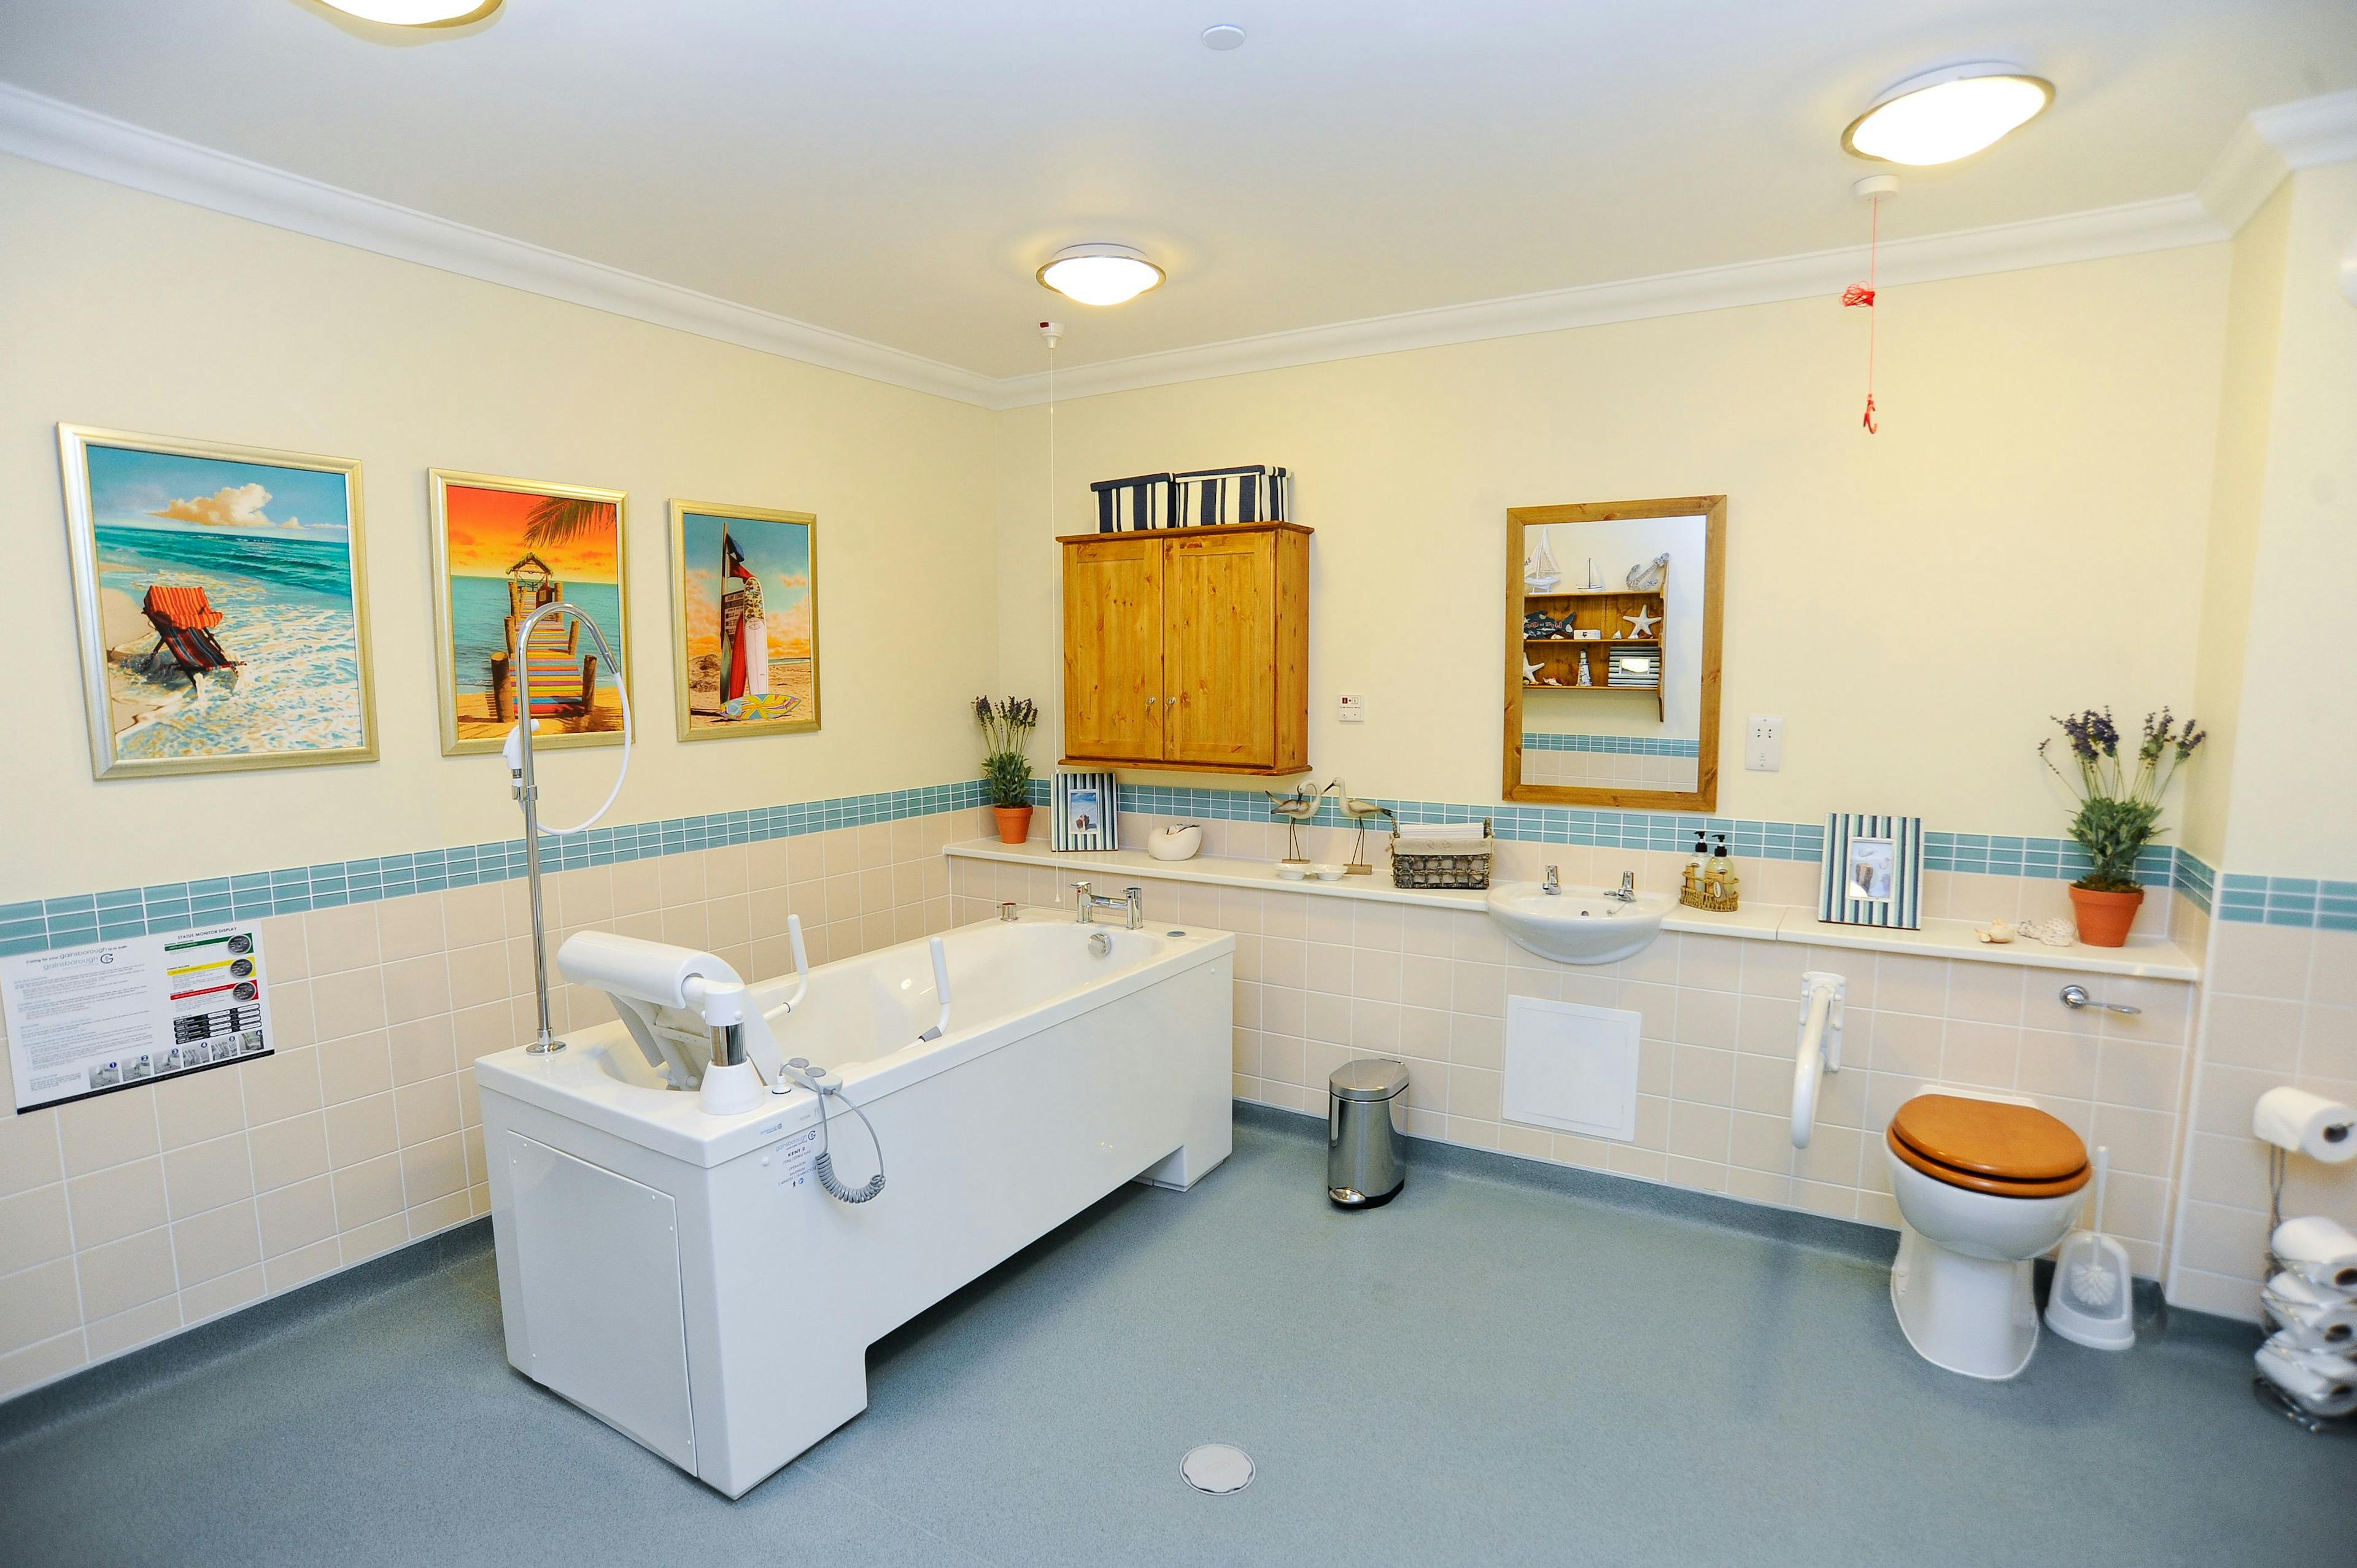 Spa Bathroom at Ritson Lodge Care Home in Gorleston-on-Sea, Great Yarmouth